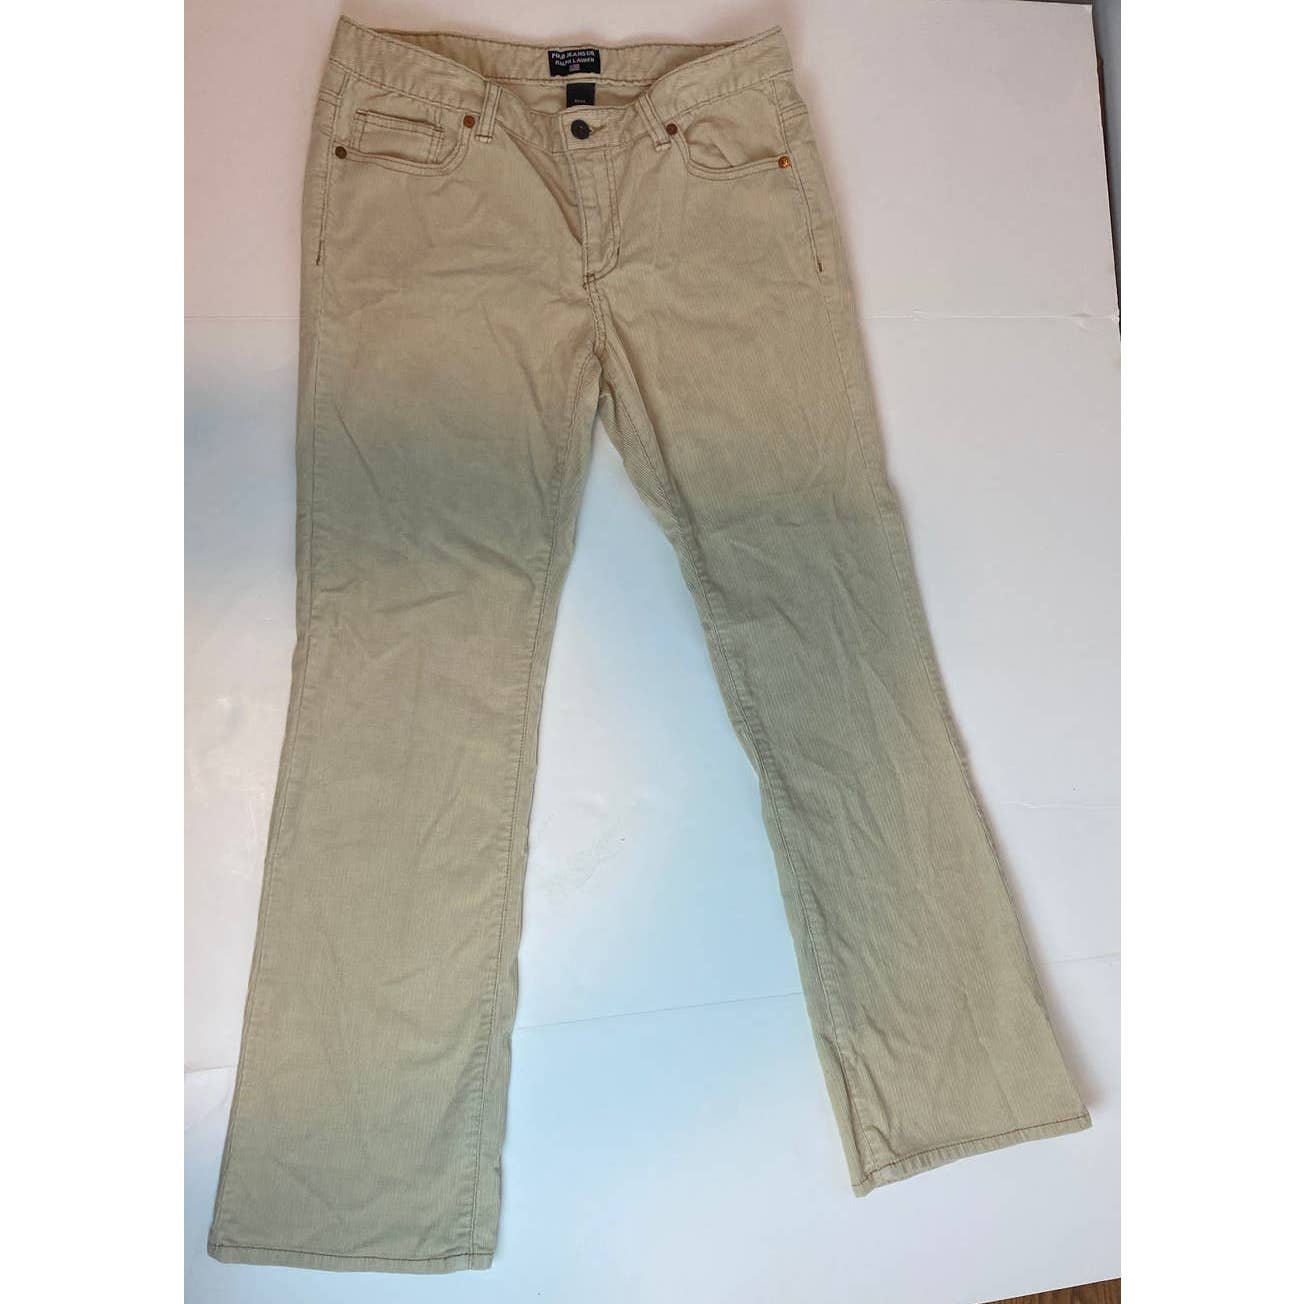 Discounted Vintage Polo Jeans Co. Ralph Lauren Tan Cord